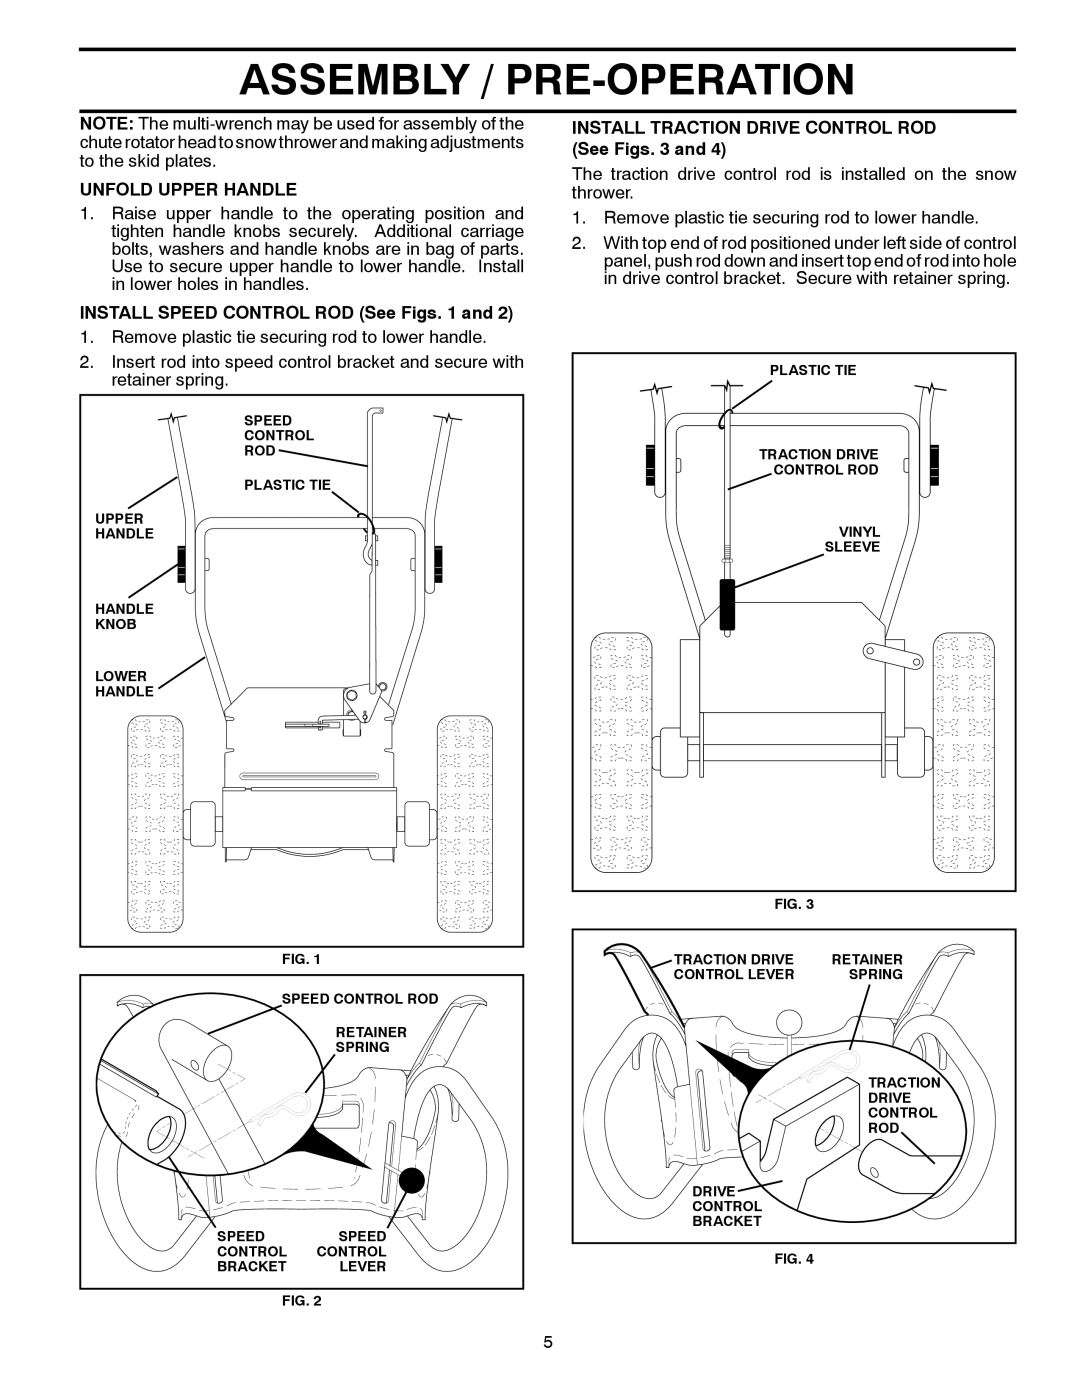 Poulan 96192003201 Assembly / Pre-Operation, Unfold Upper Handle, INSTALL SPEED CONTROL ROD See Figs. 1 and, Plastic Tie 